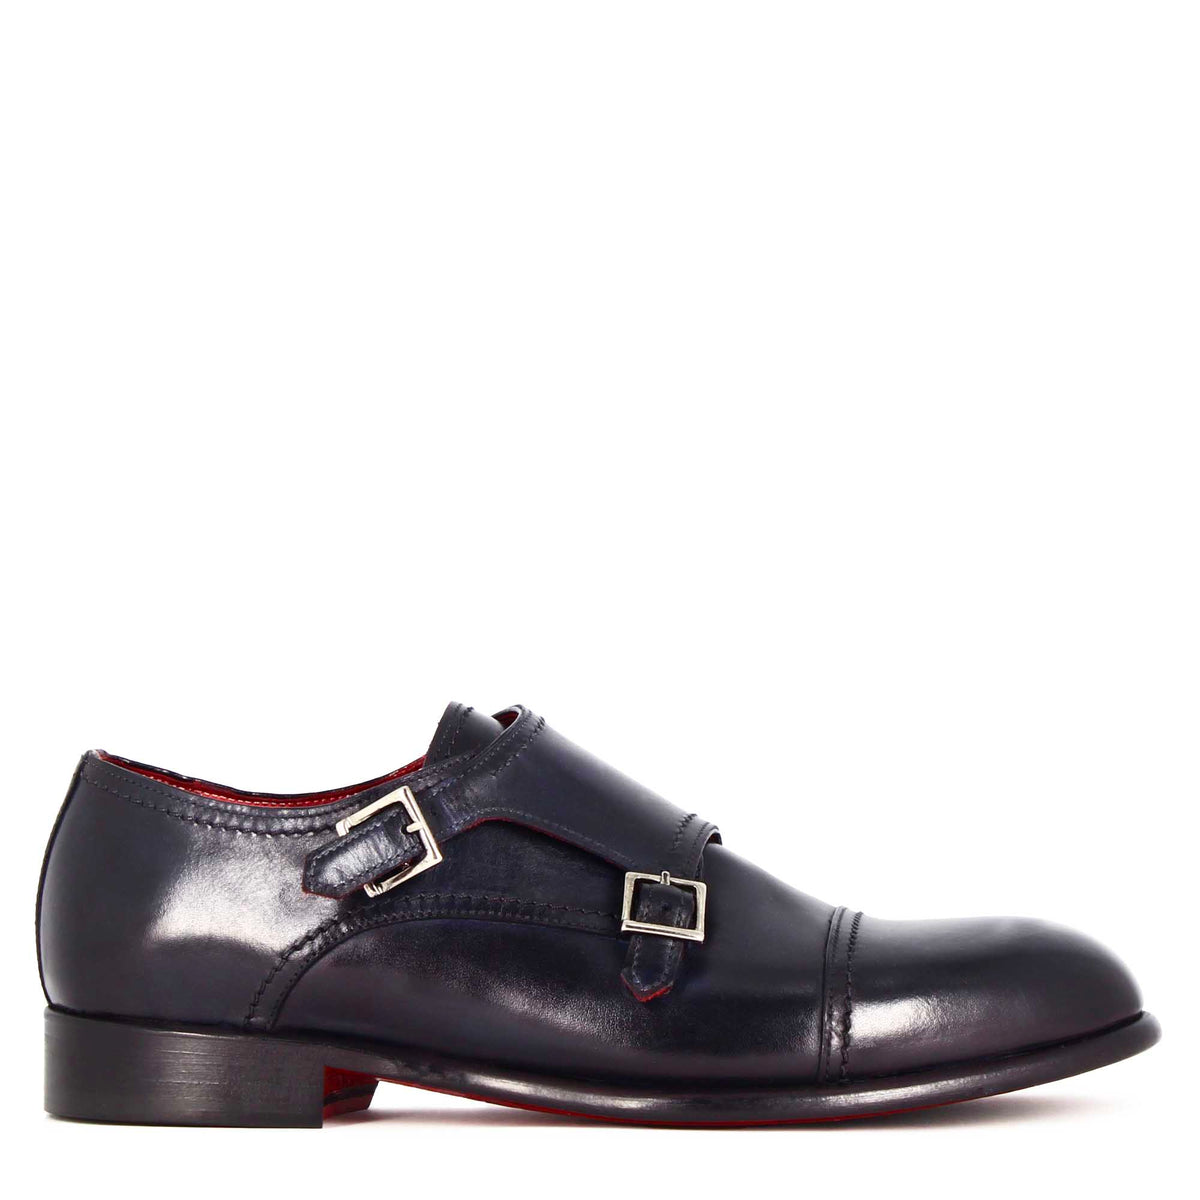 Men's double buckle shoe in dark blue smooth leather